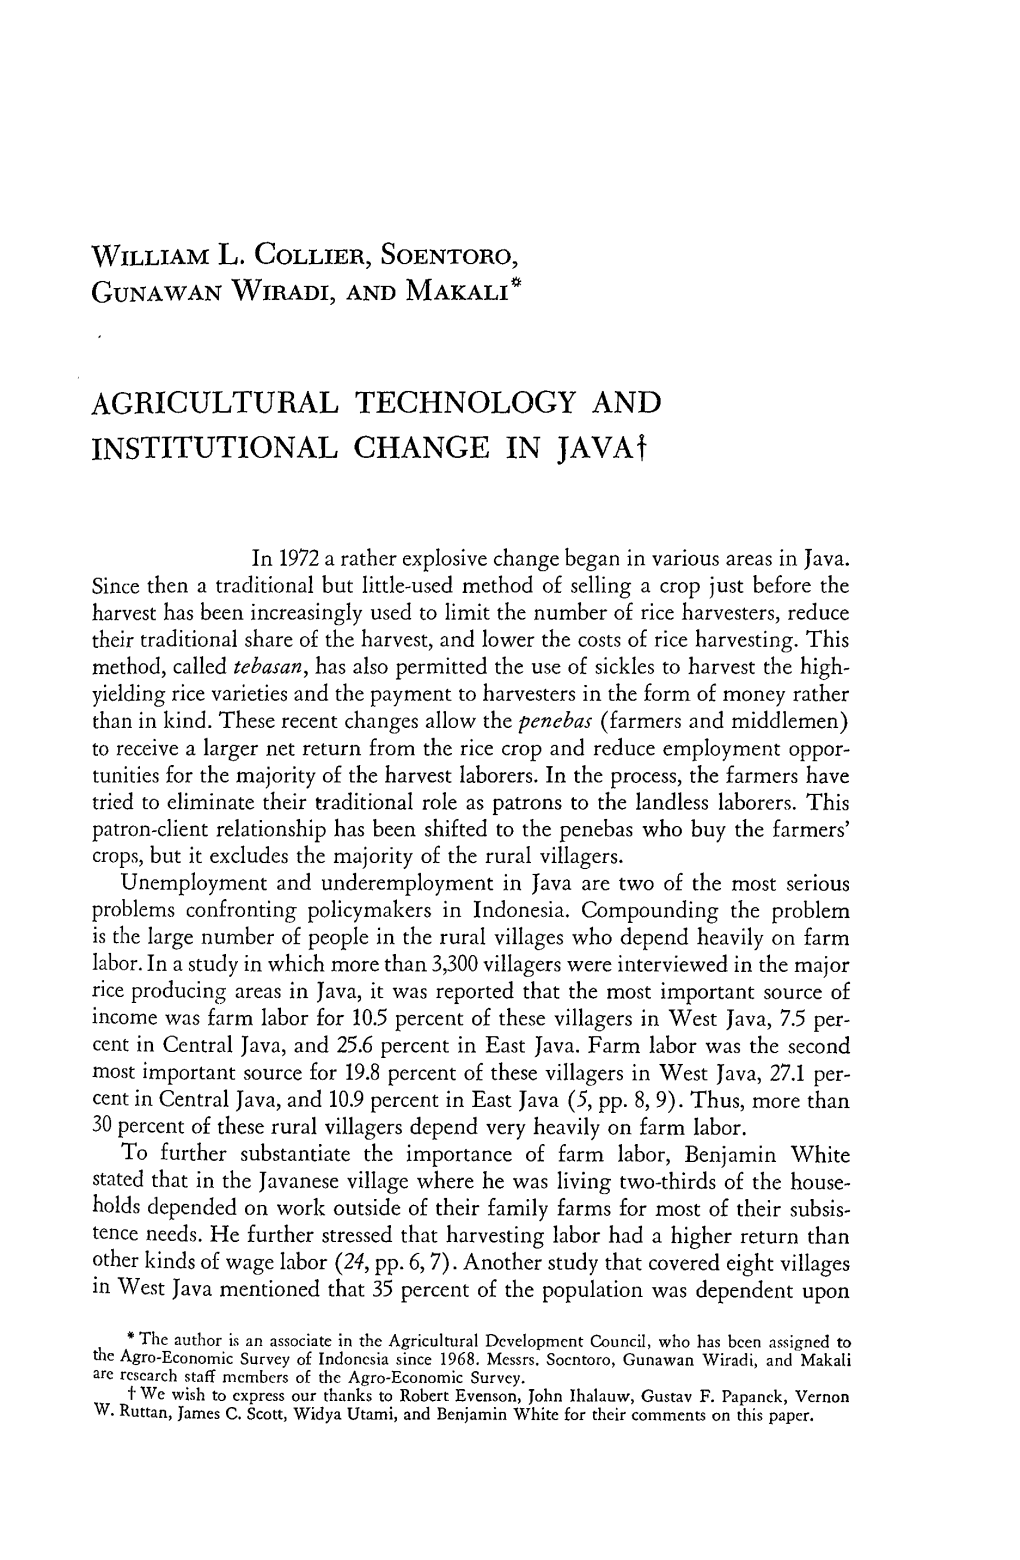 AGRICULTURAL TECHNOLOGY and INSTITUTIONAL CHANGE in Javat